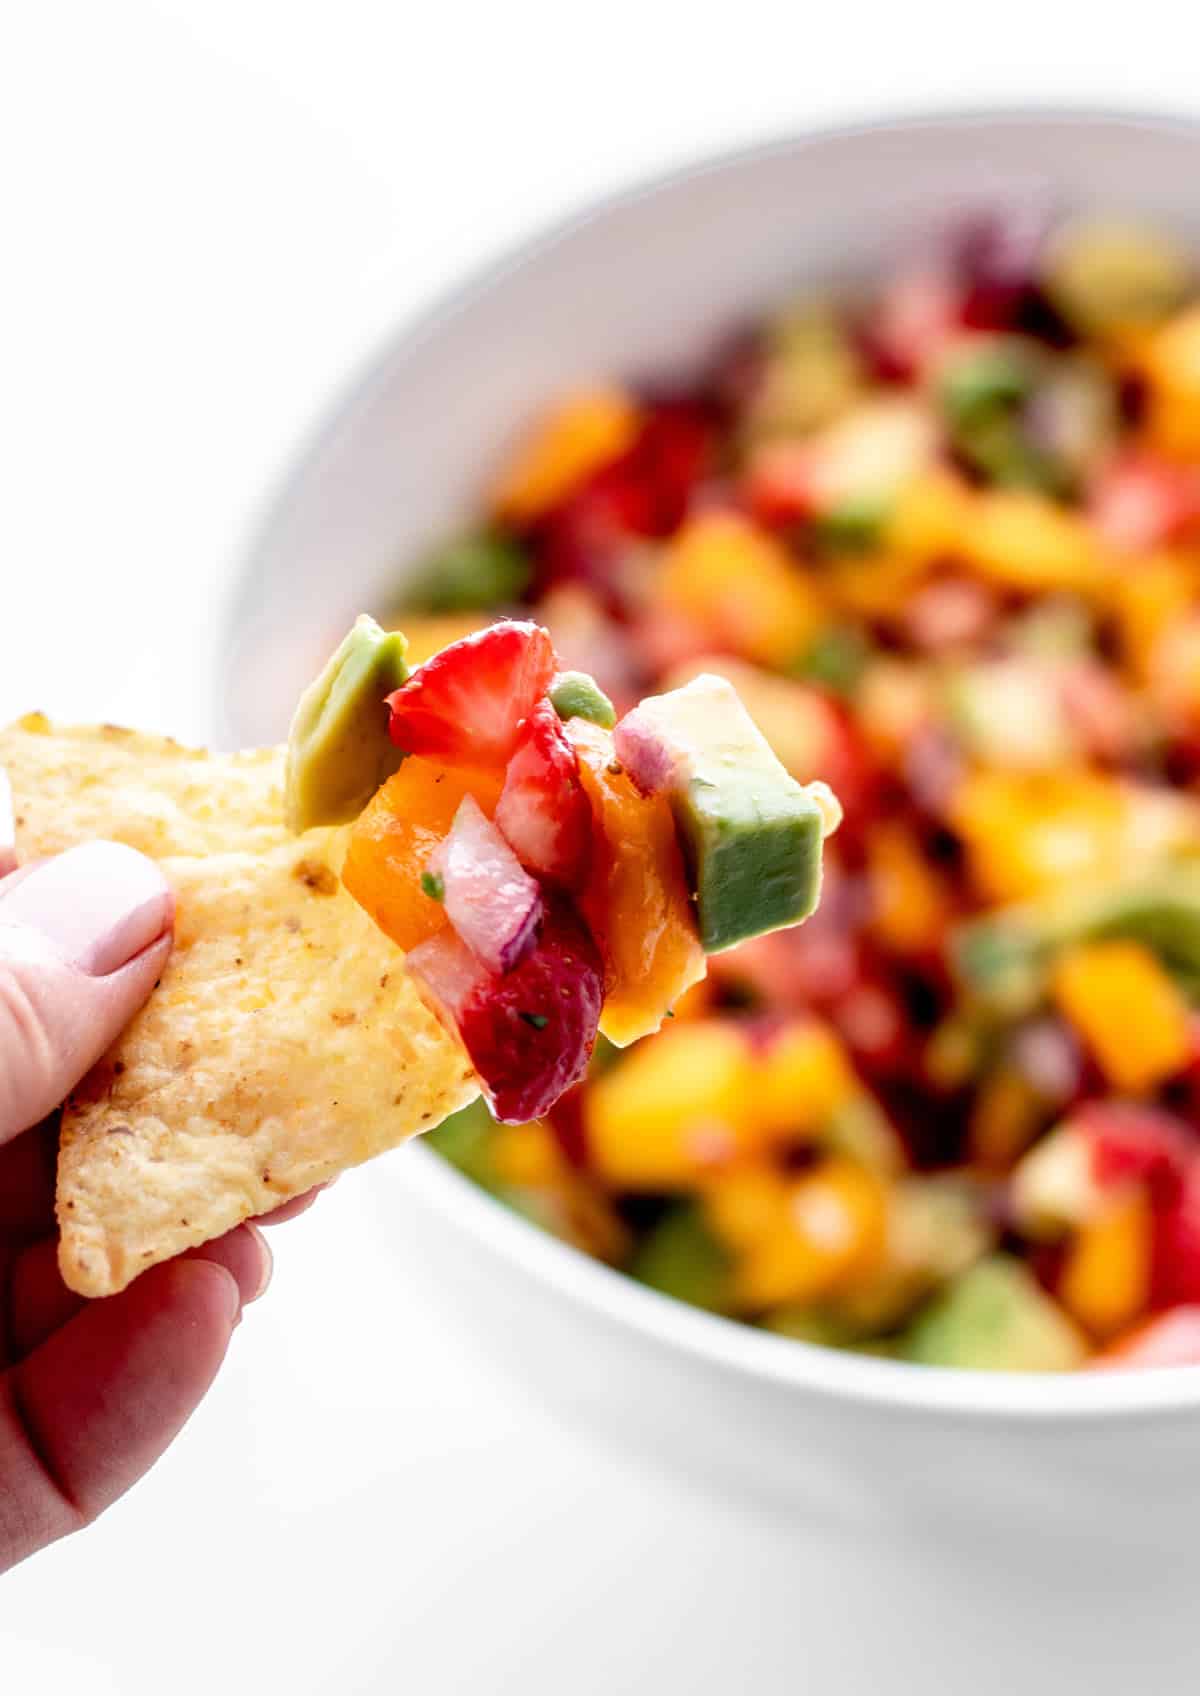 A tortilla chip scooping up some strawberry mango salsa.